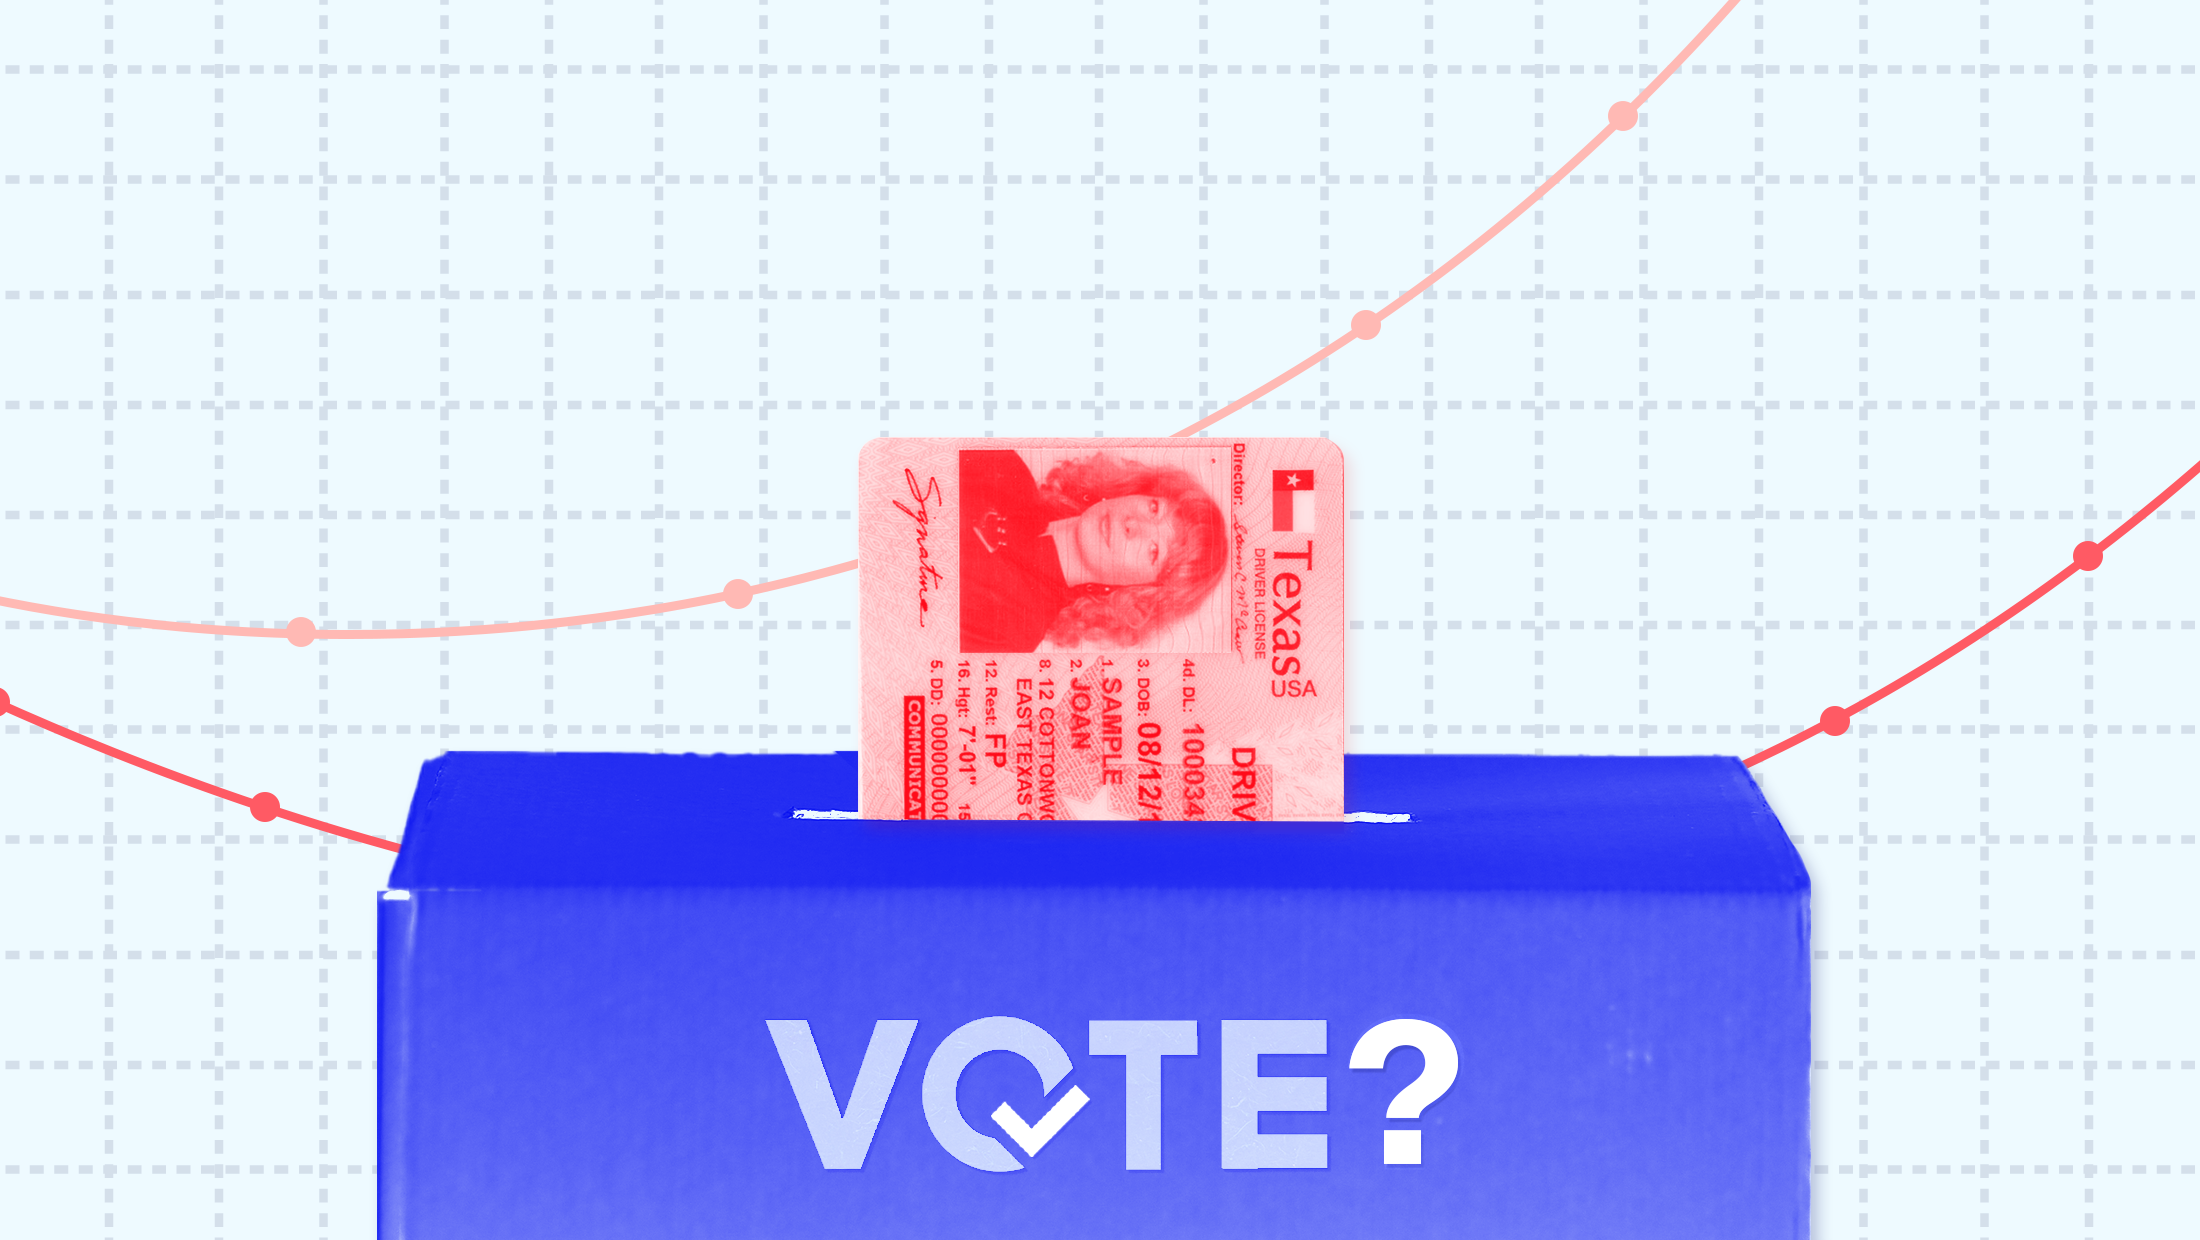 A ballot box with a Texas photo ID colored red sticking out of it on a background of graph paper with a two red trend lines.